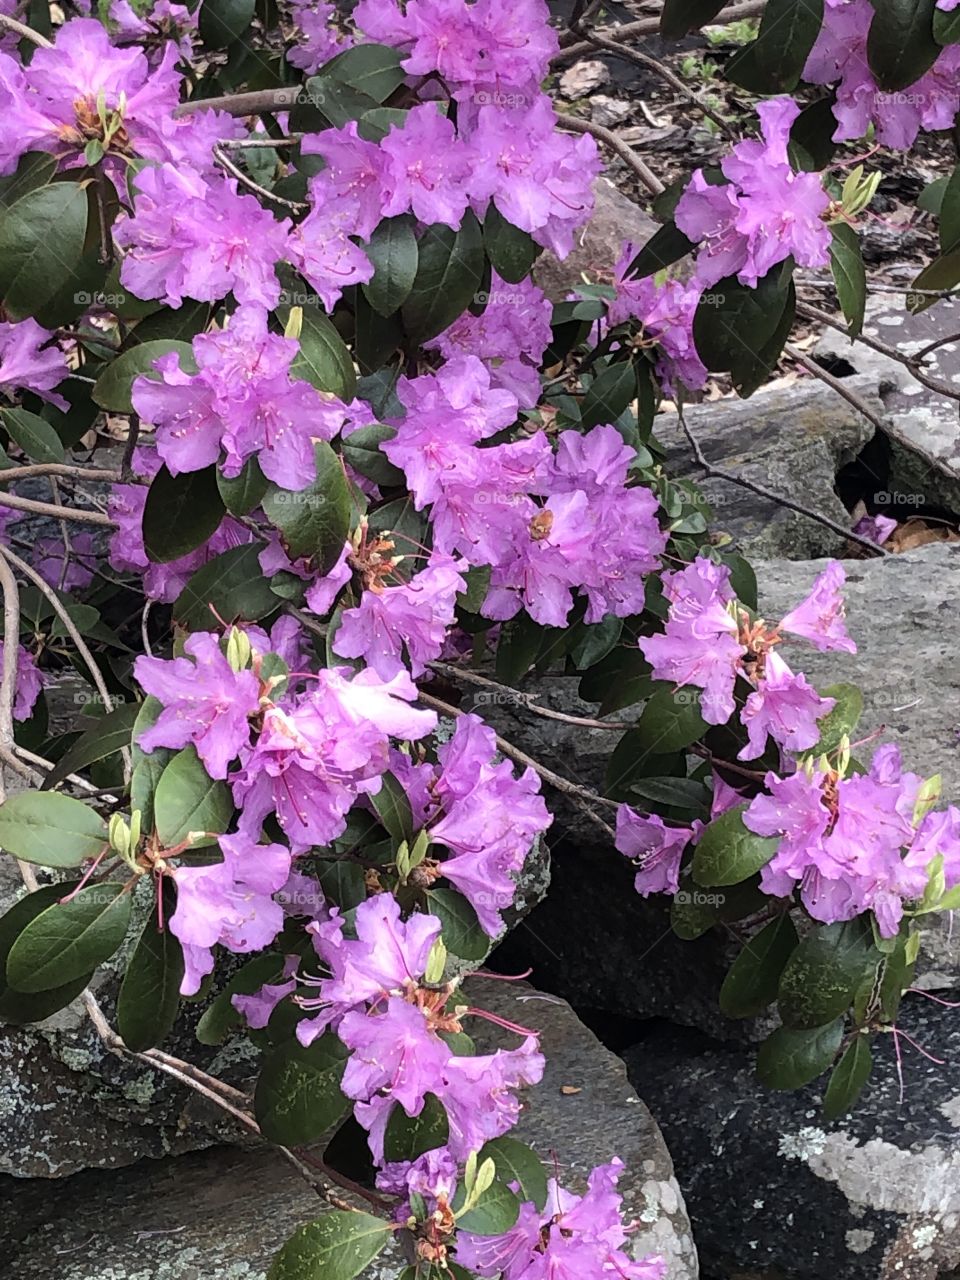 Rhododendron in bloom growing over rocks